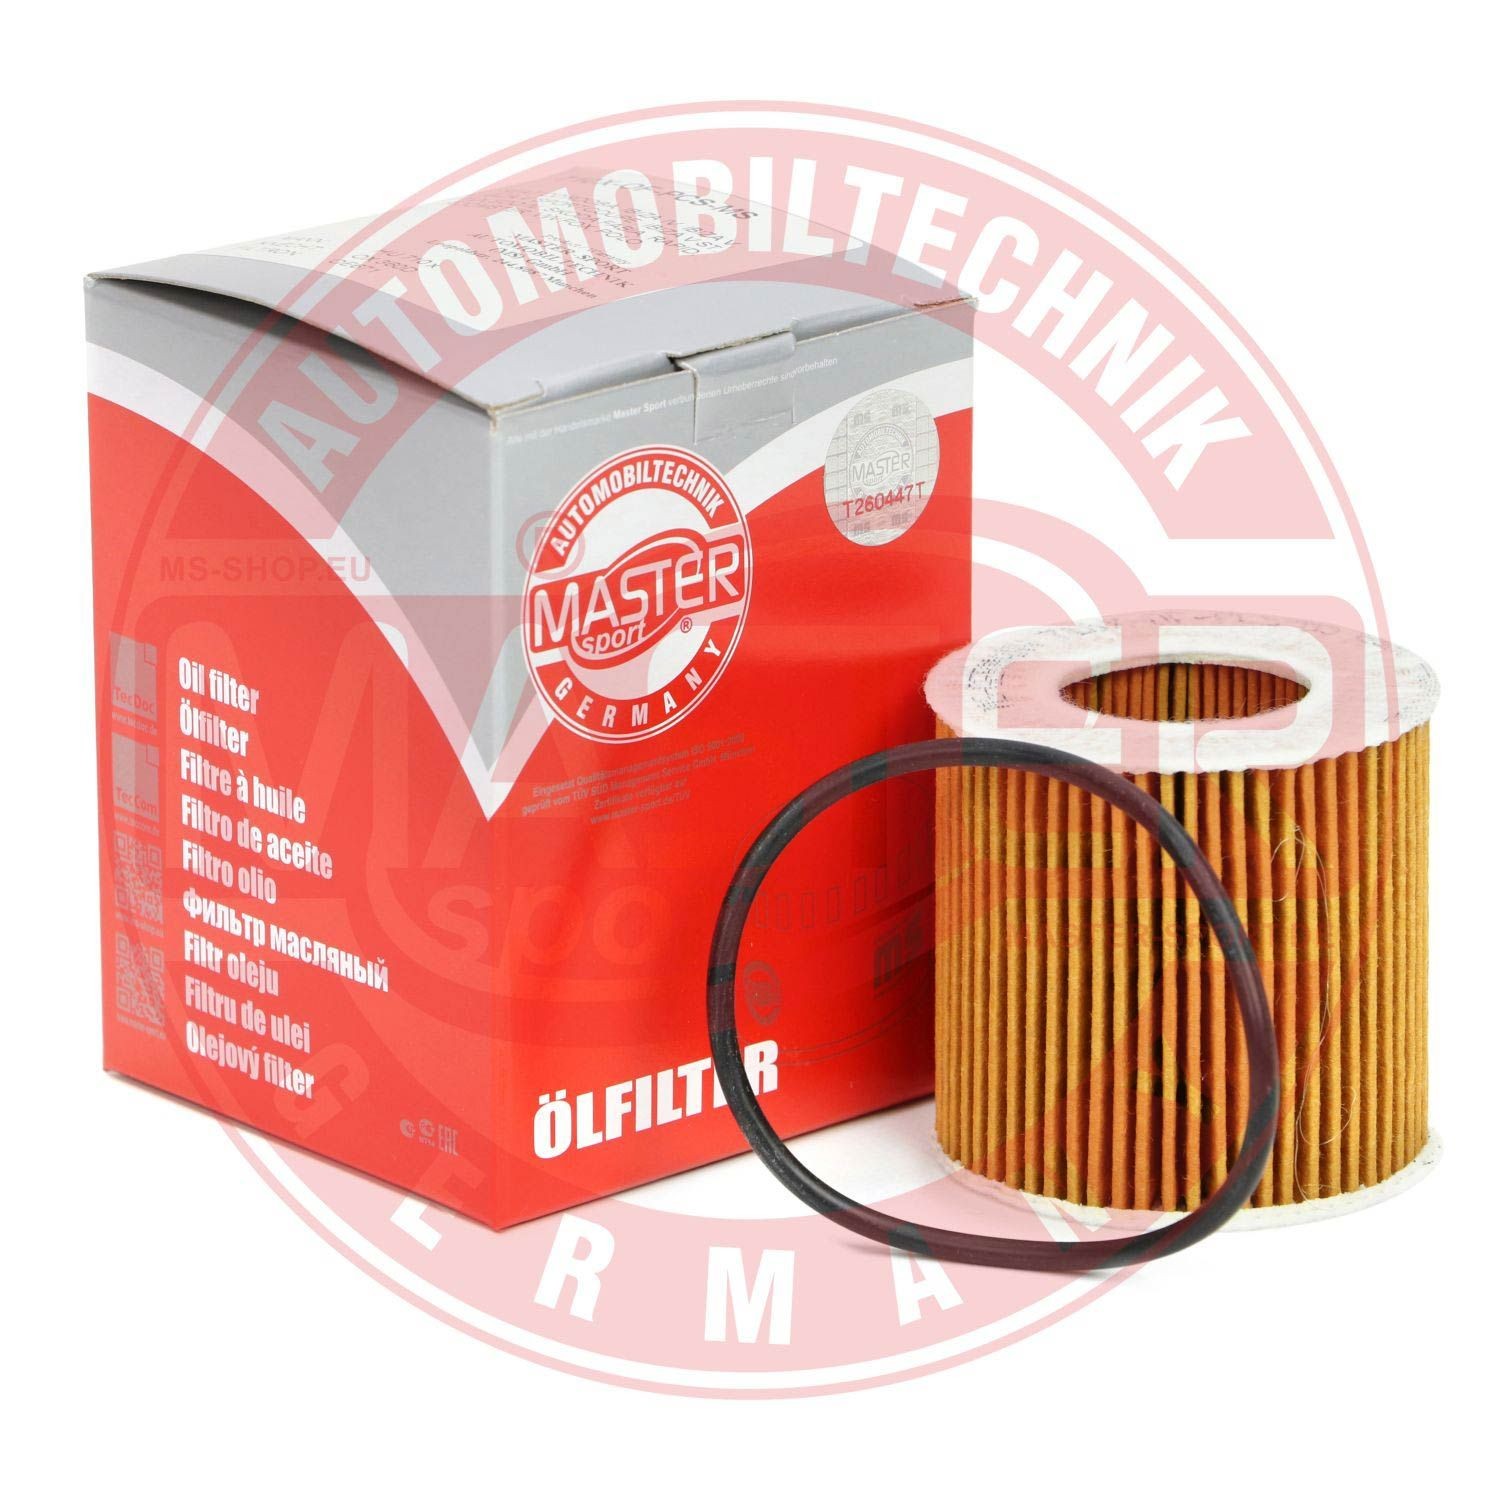 710X-OF-PCS-MS Oil filter AB440007100 MASTER-SPORT with gaskets/seals, Filter Insert